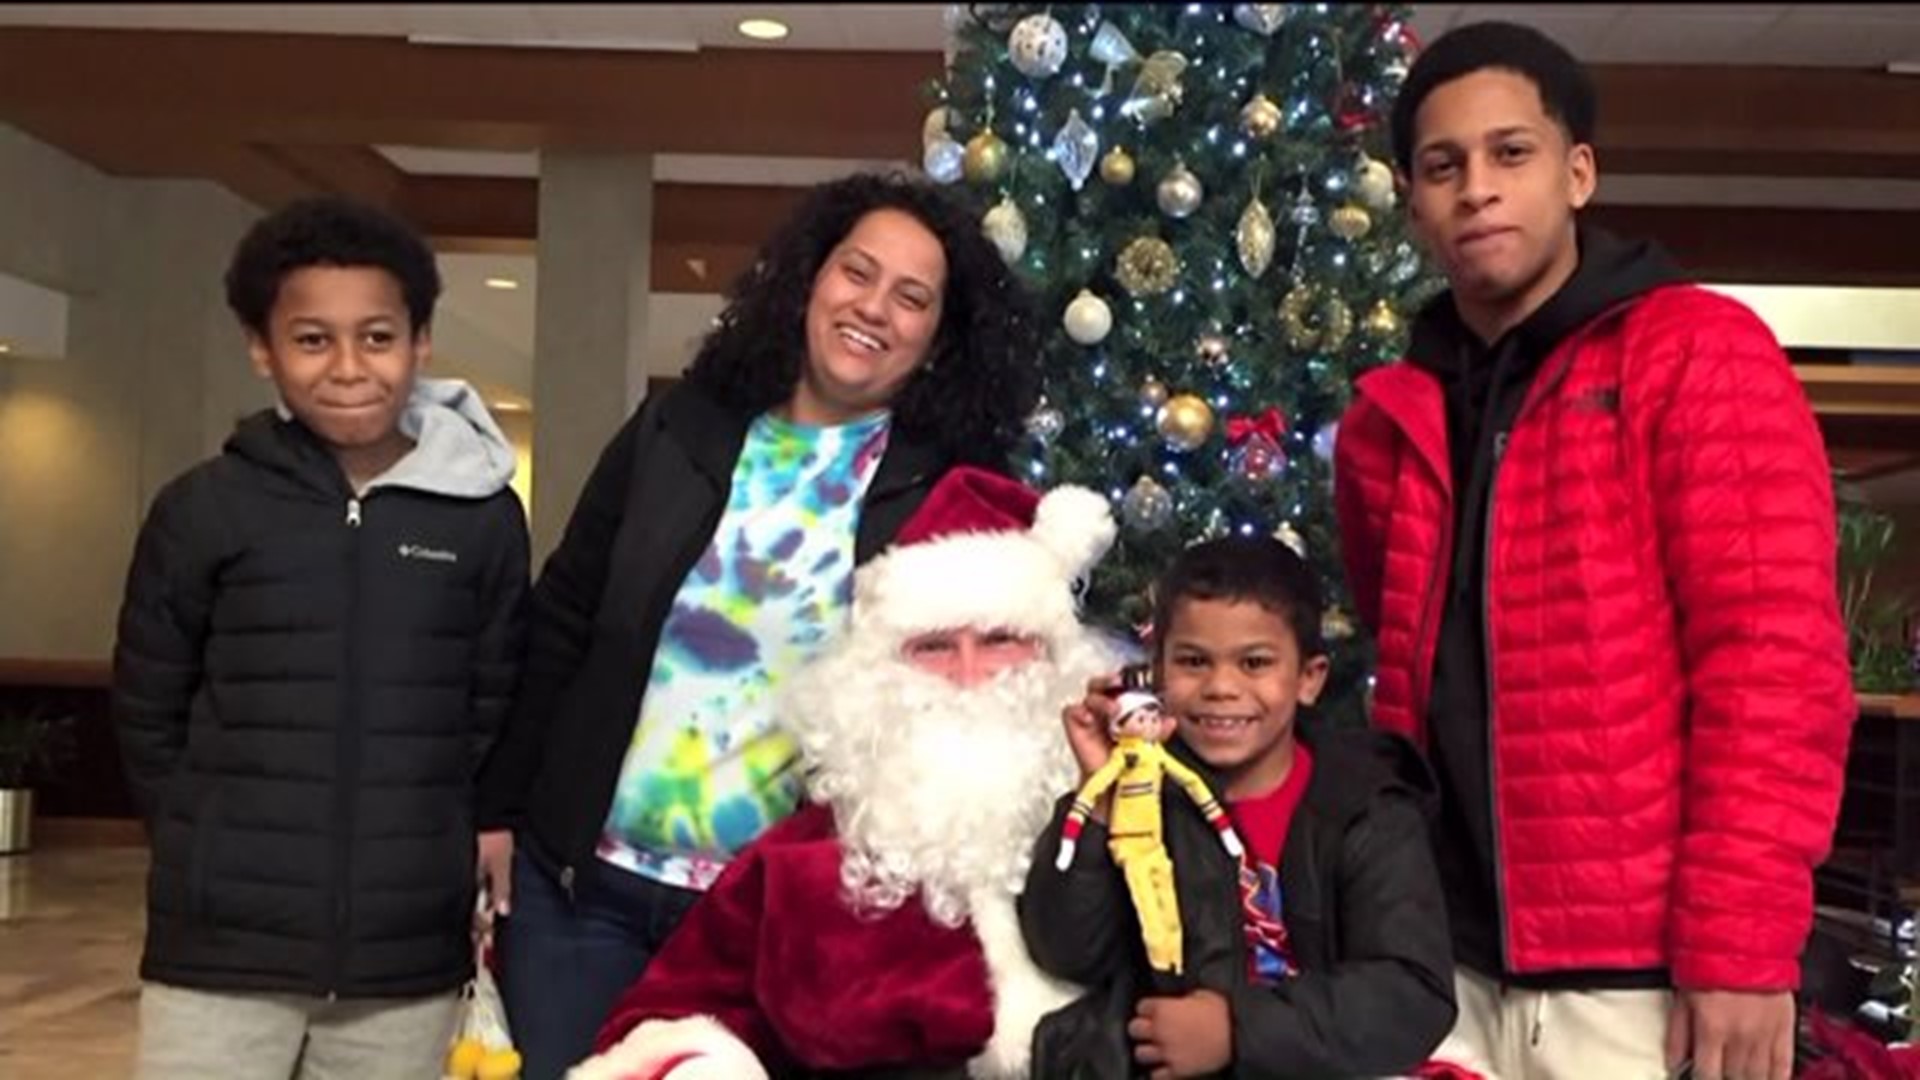 Santa visits victims of Bridgeport condo fire who lost everything right after Christmas